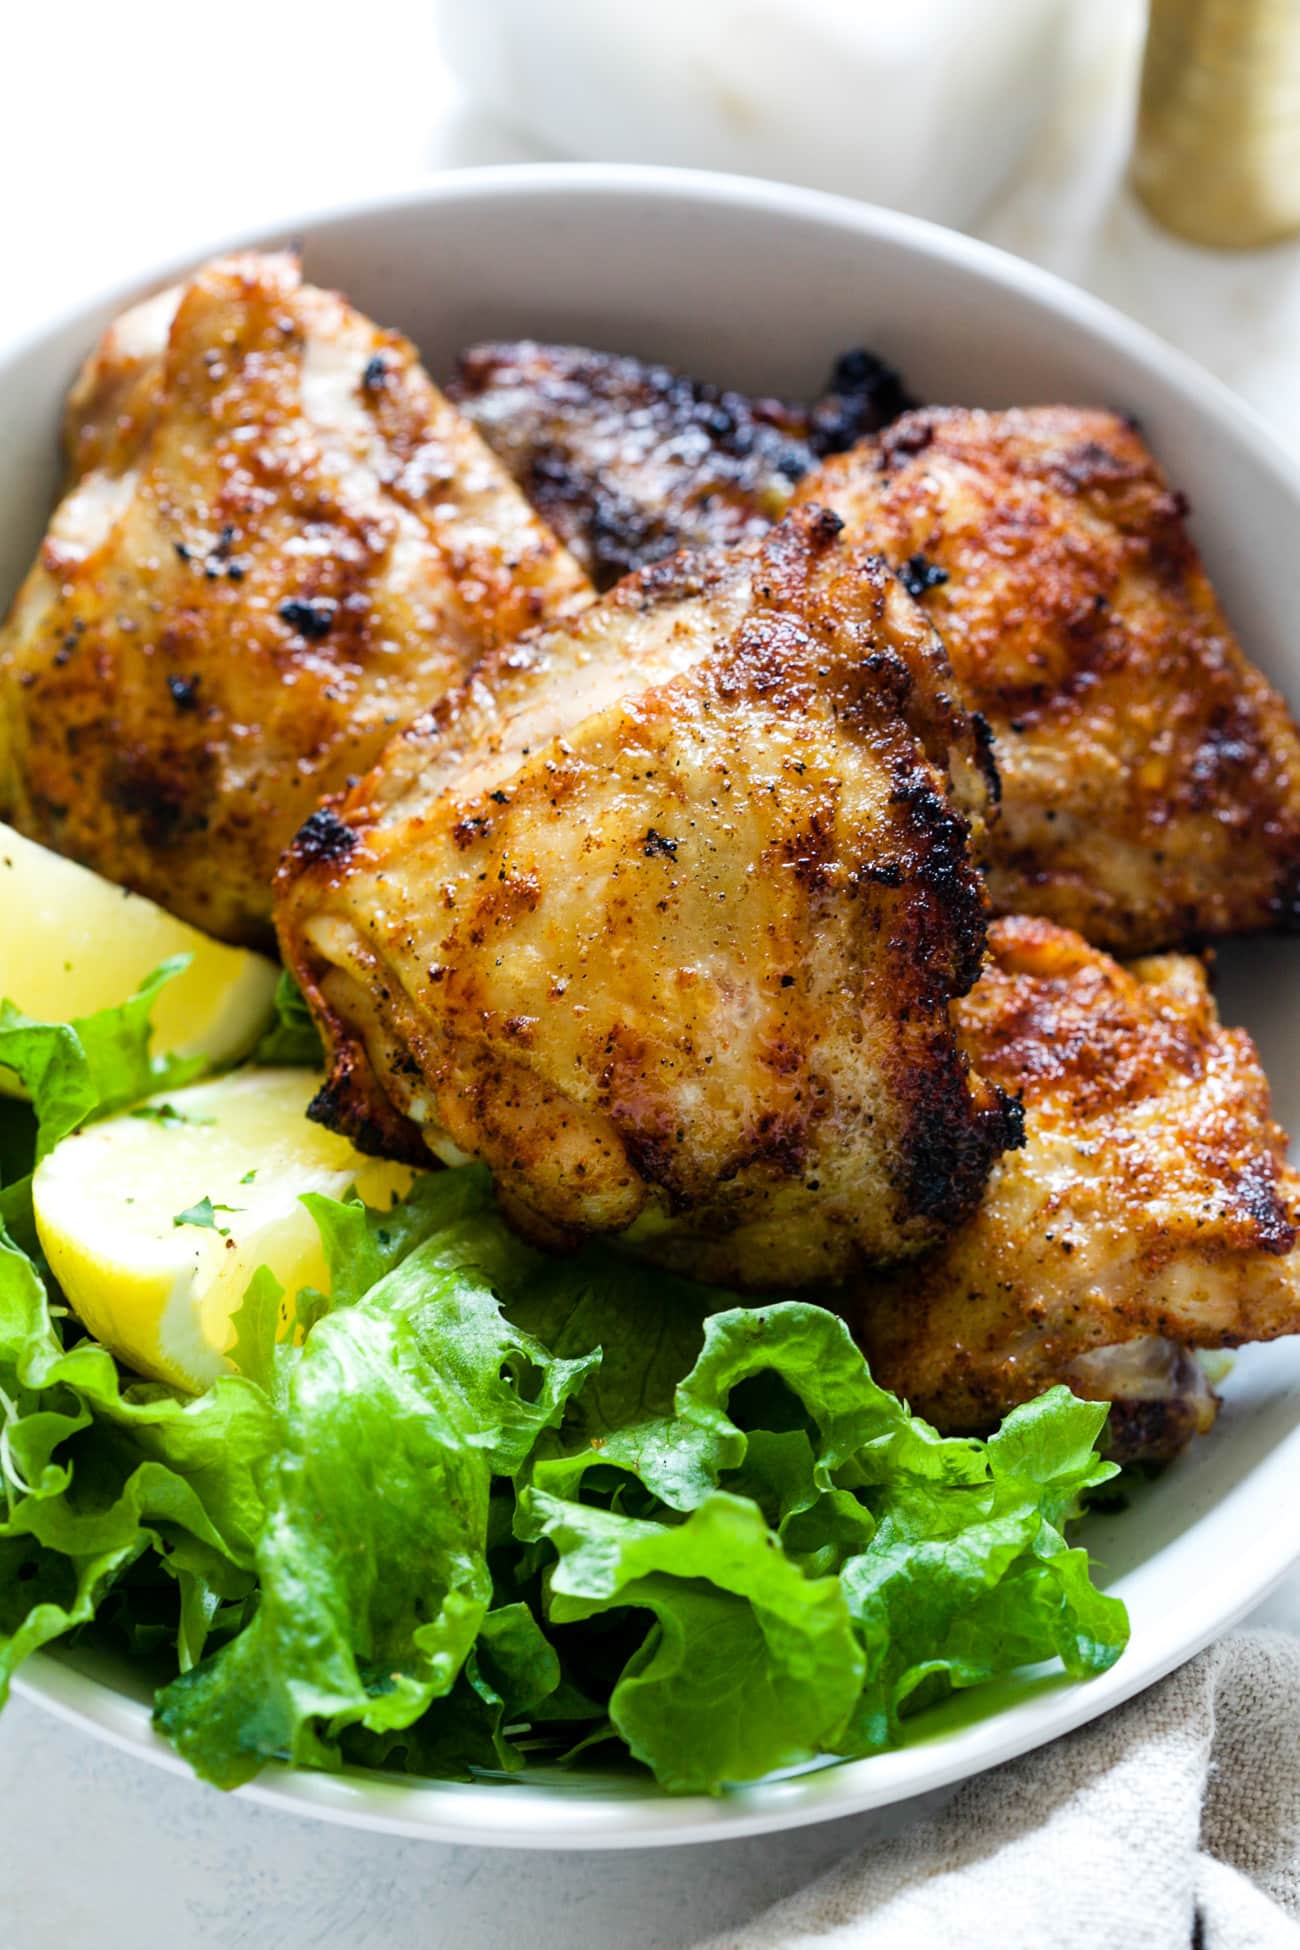 Grilled chicken thighs on a white plate next to lettuce and sliced lemons